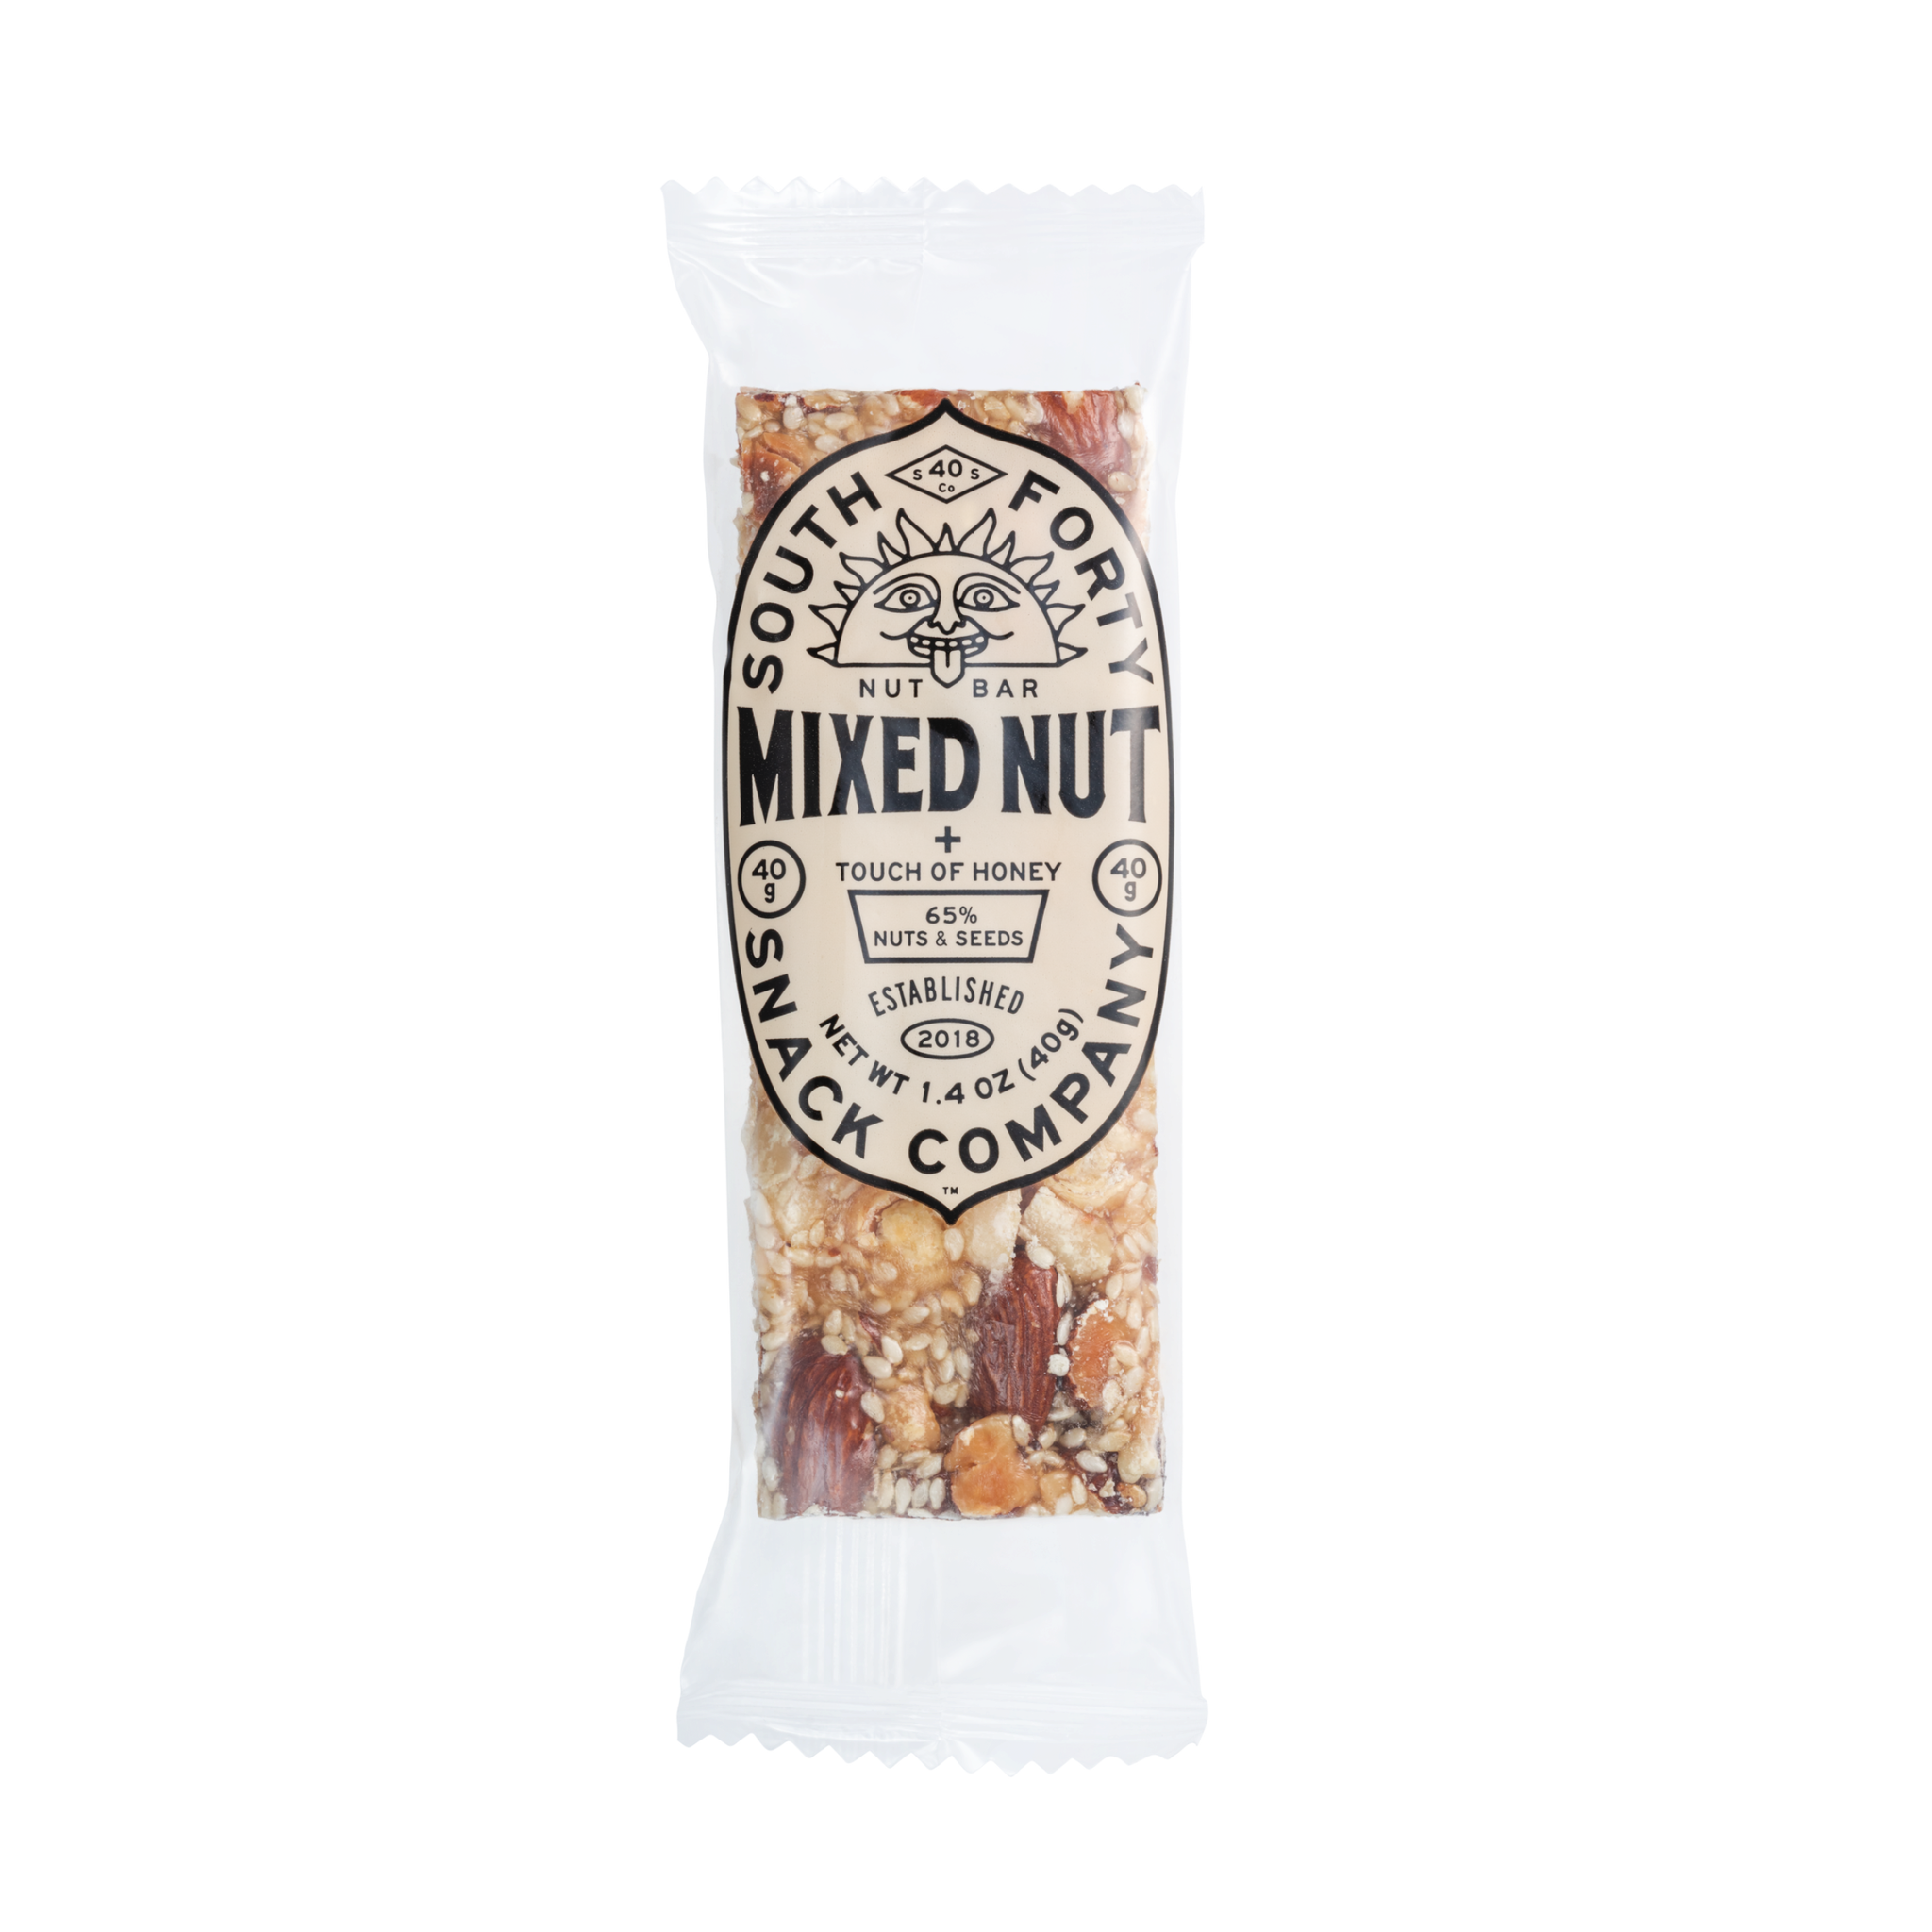  South 40 Snacks Pistachio and Cashew Bars, Extra Crunchy Nut  Snack Bar, Simple Ingredients, Honey and Sugar, Unique Delicious Healthy Nut  Clusters(40g Bar, Pack of 12) : Grocery & Gourmet Food